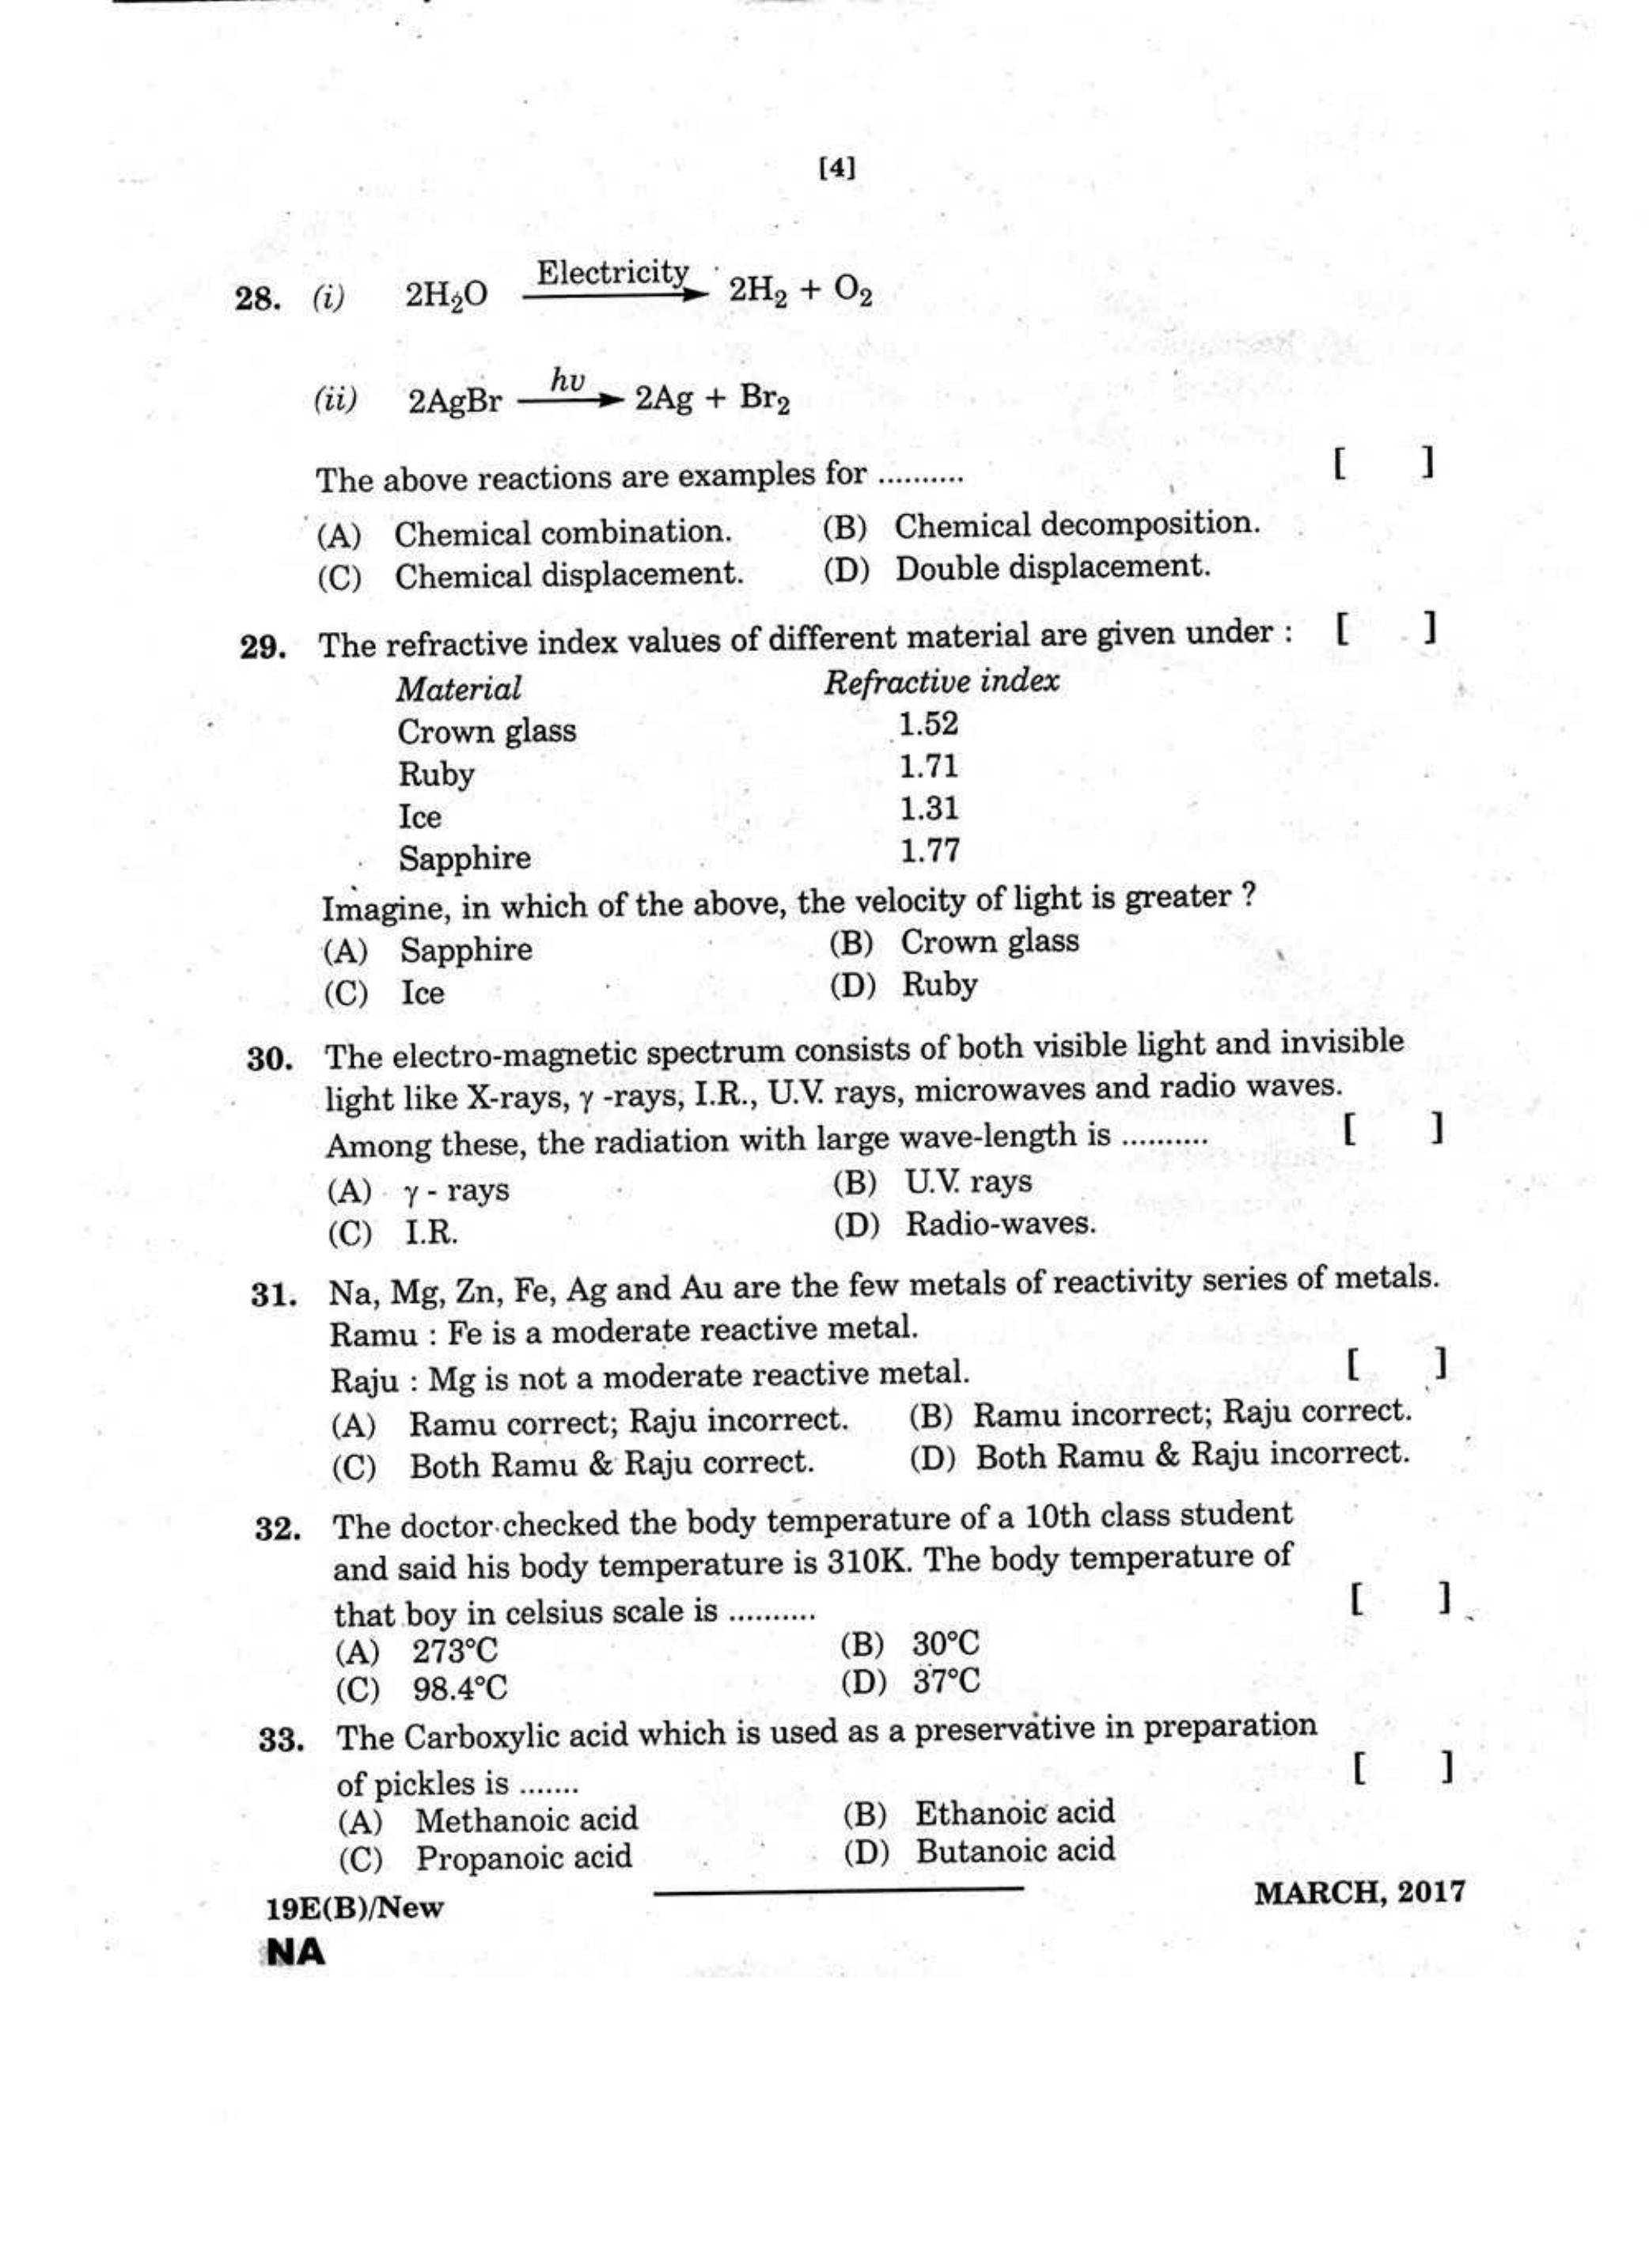 AP Class 10 Science (Paper I) 2017 Question Paper - Page 8